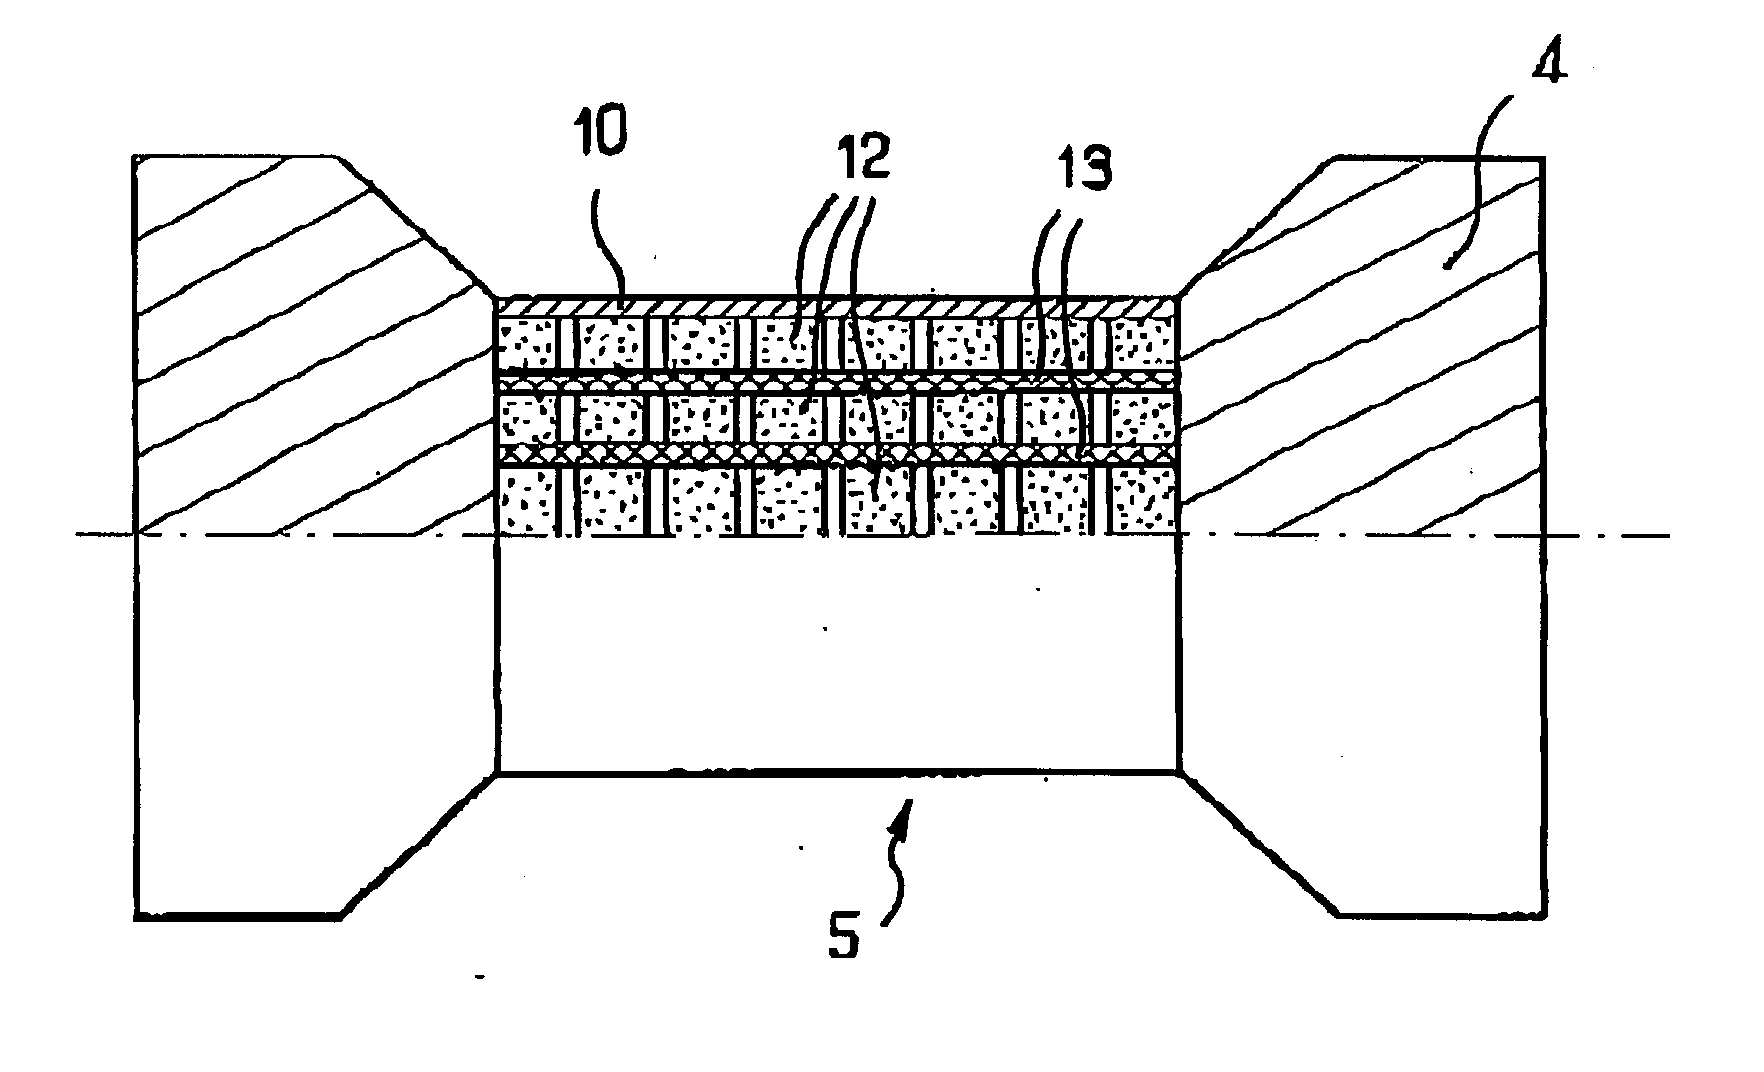 Microfuel cells for use particularly in portable electronic devices and telecommunications devices